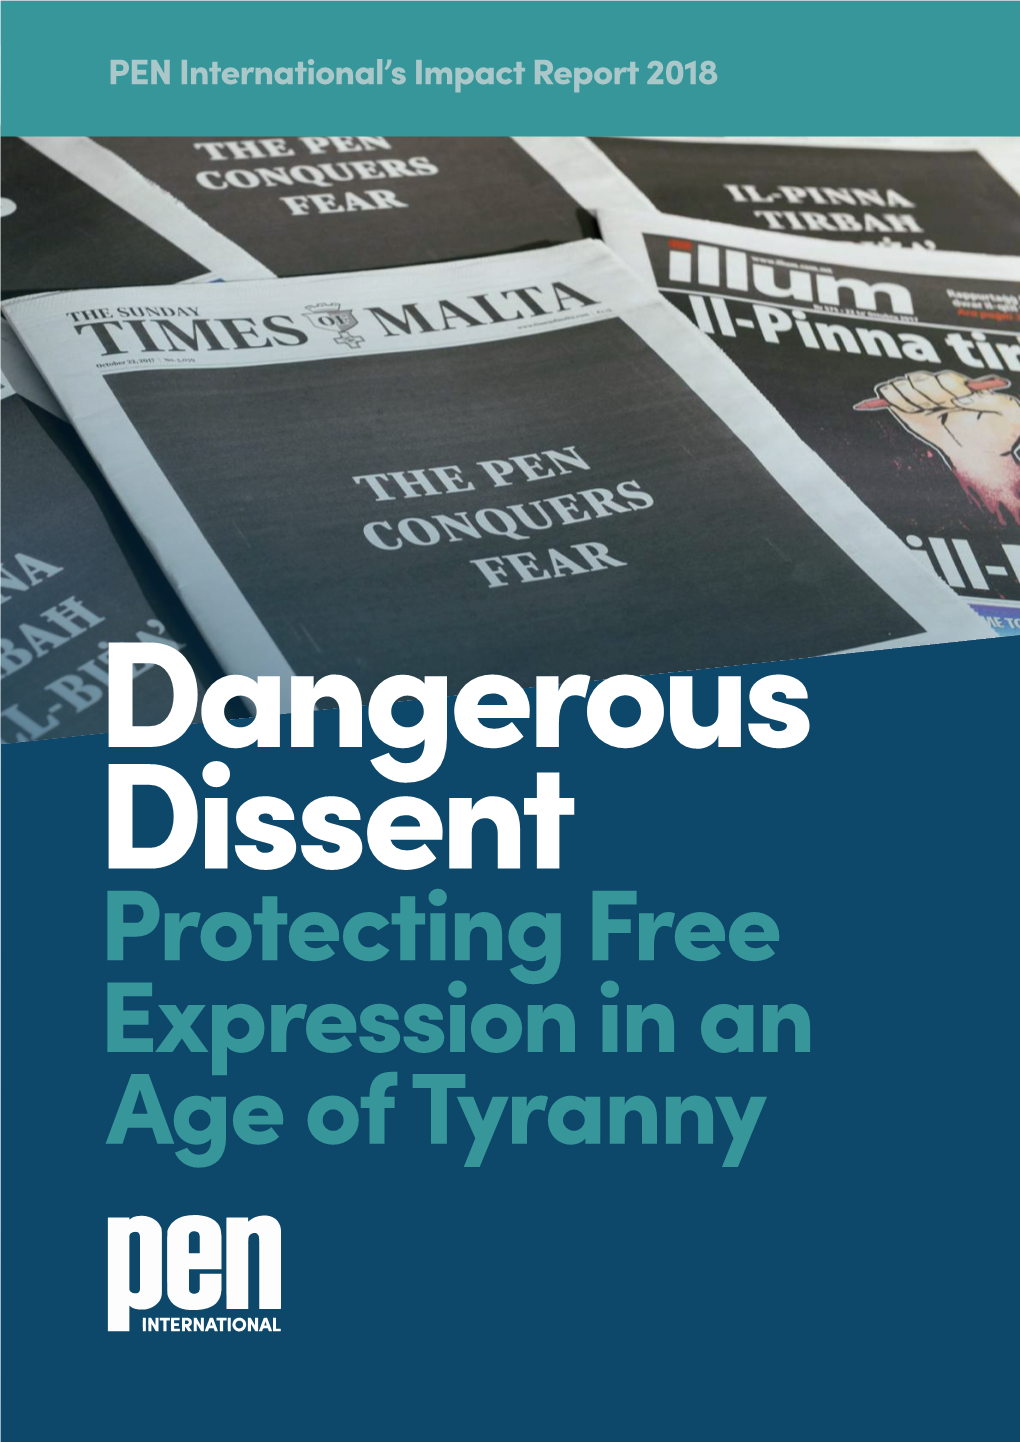 Protecting Free Expression in an Age of Tyranny